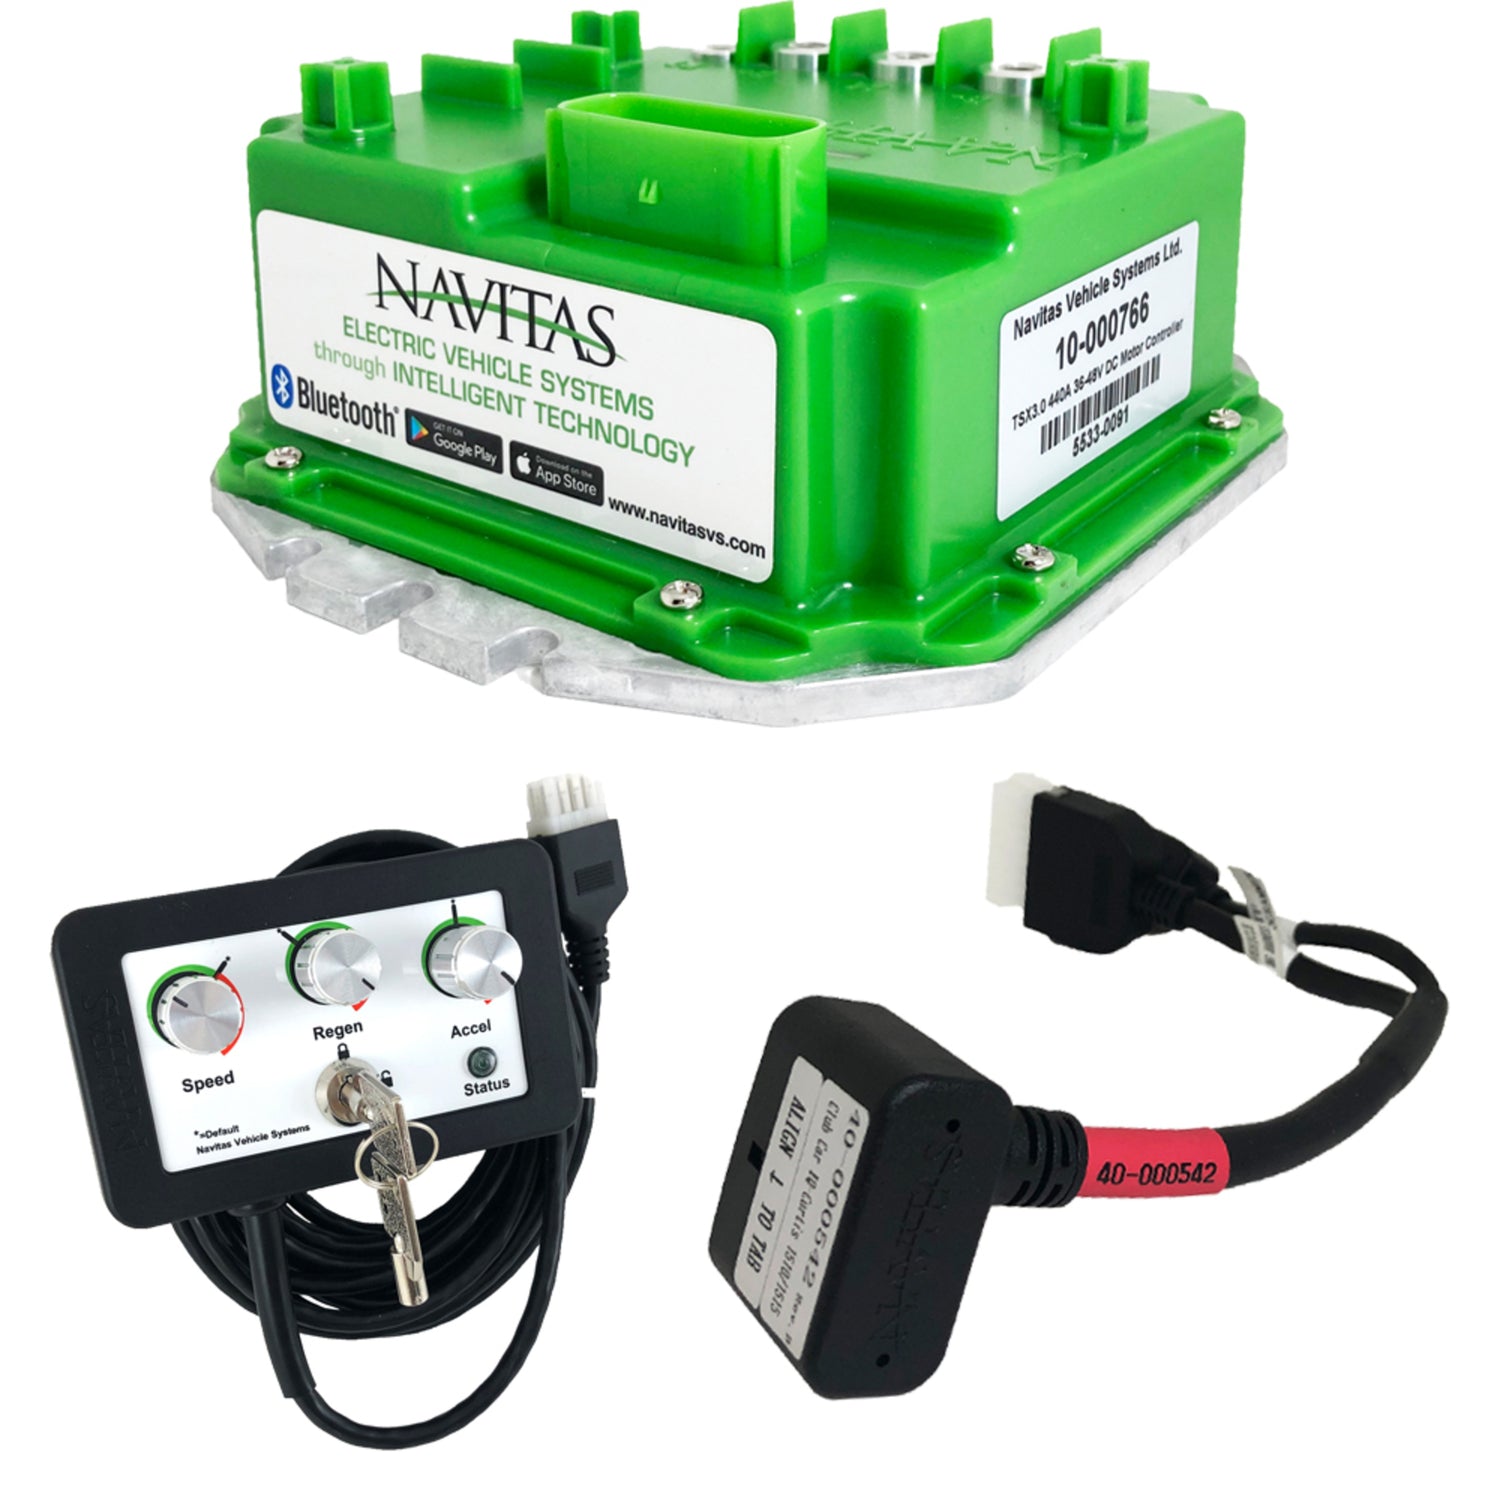 E-Z-GO MPT-Utility Navitas 600-Amp 48-Volt Controller Kit (Years 2003-Up)